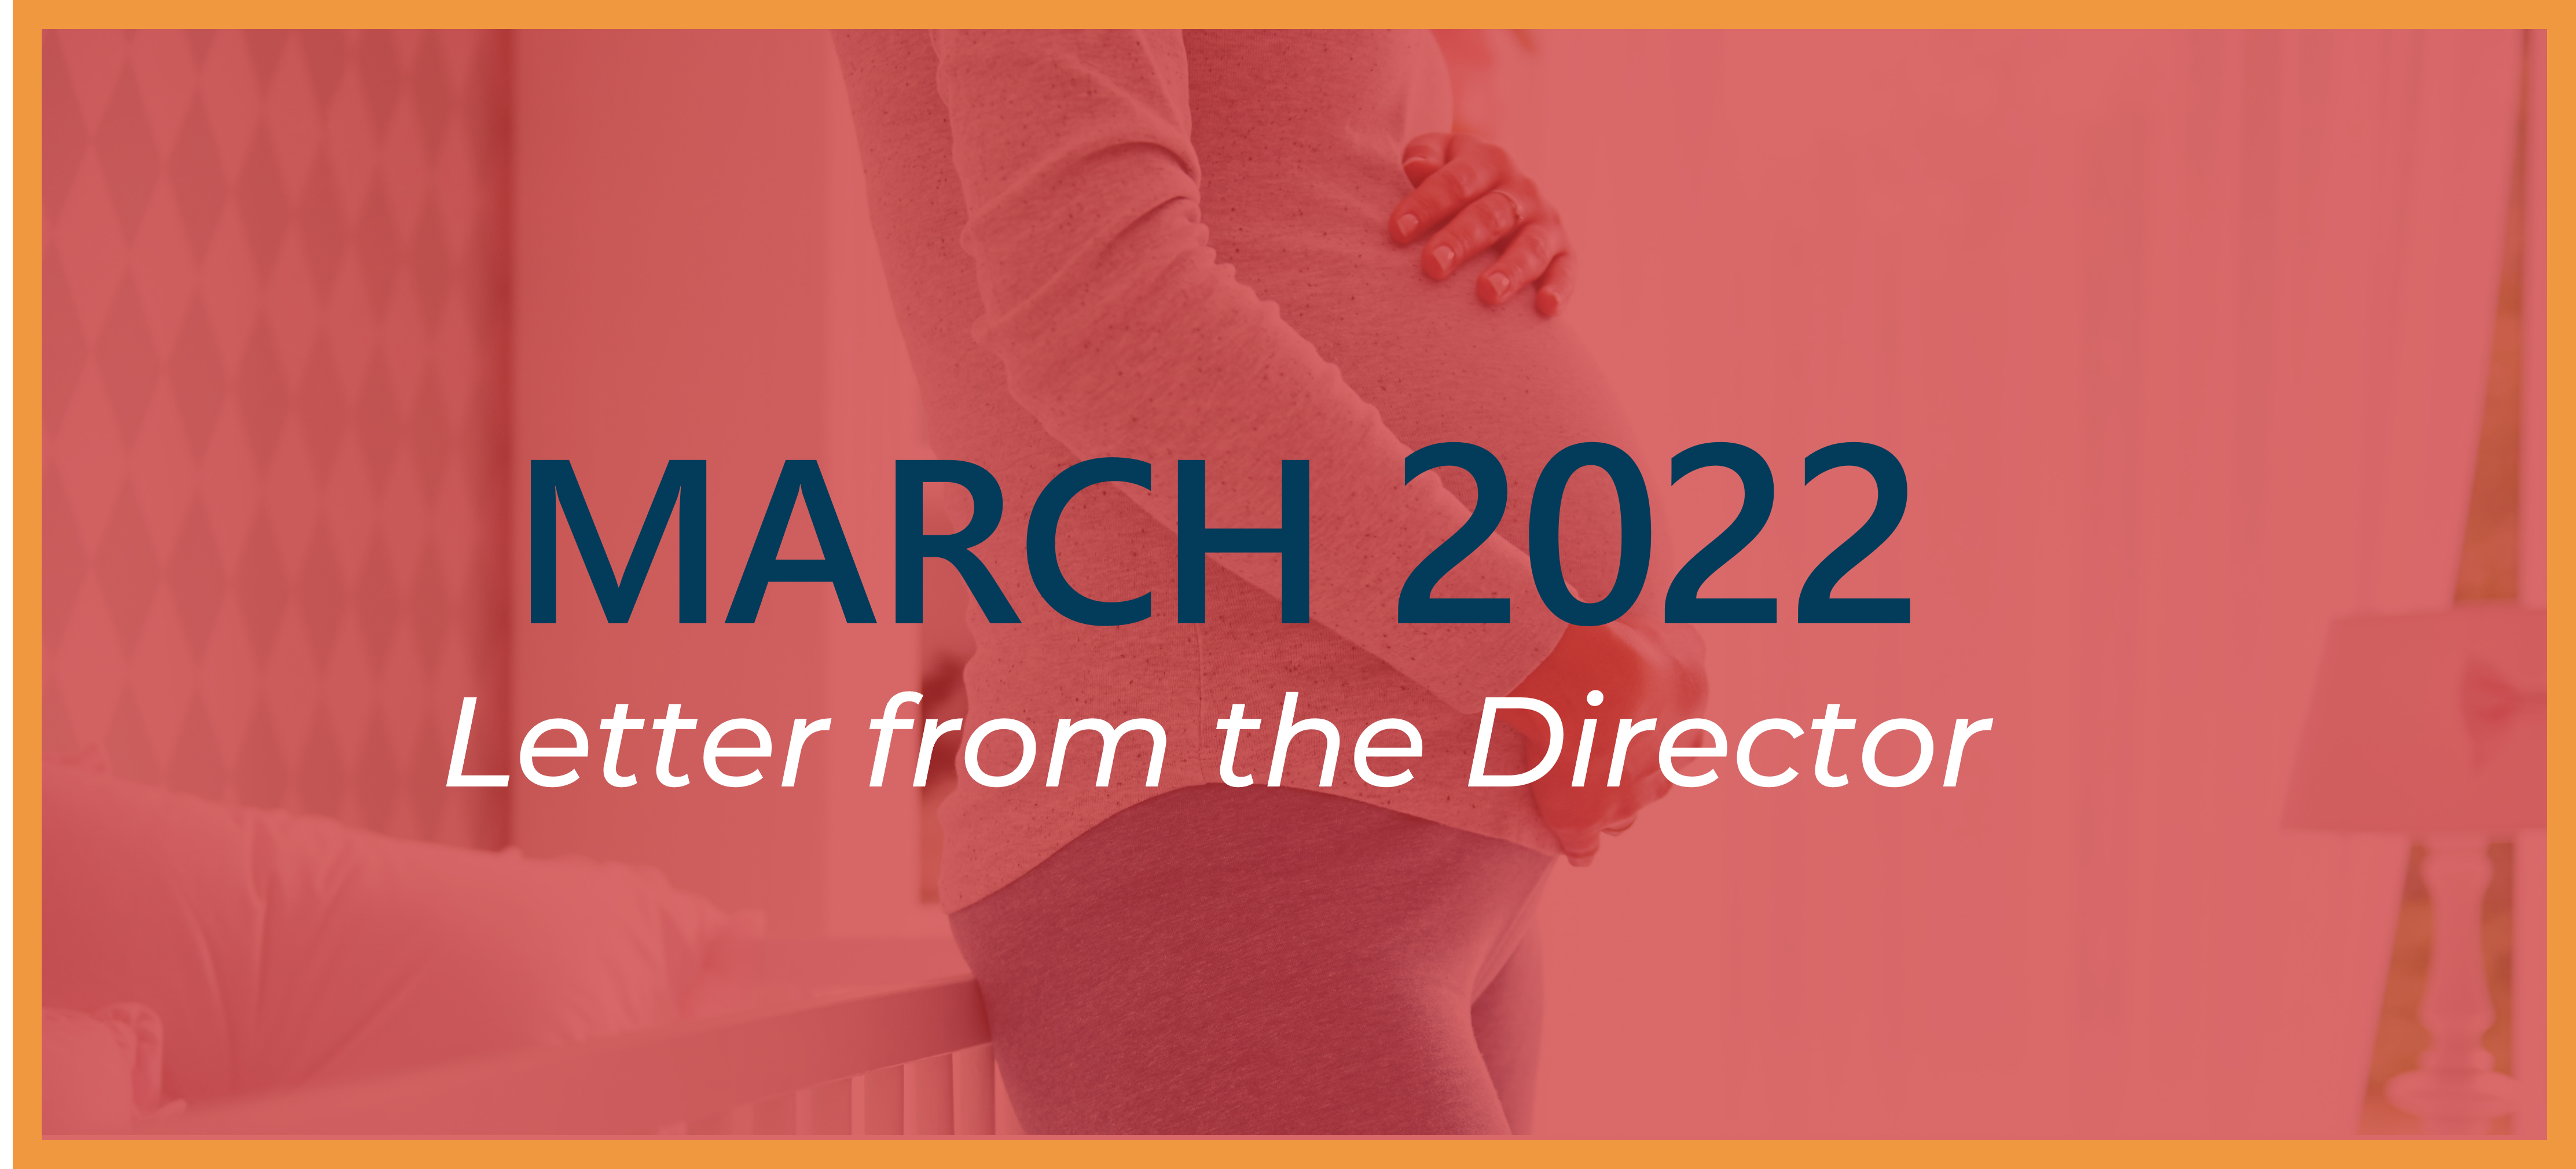 March 2022 Letter from the Director